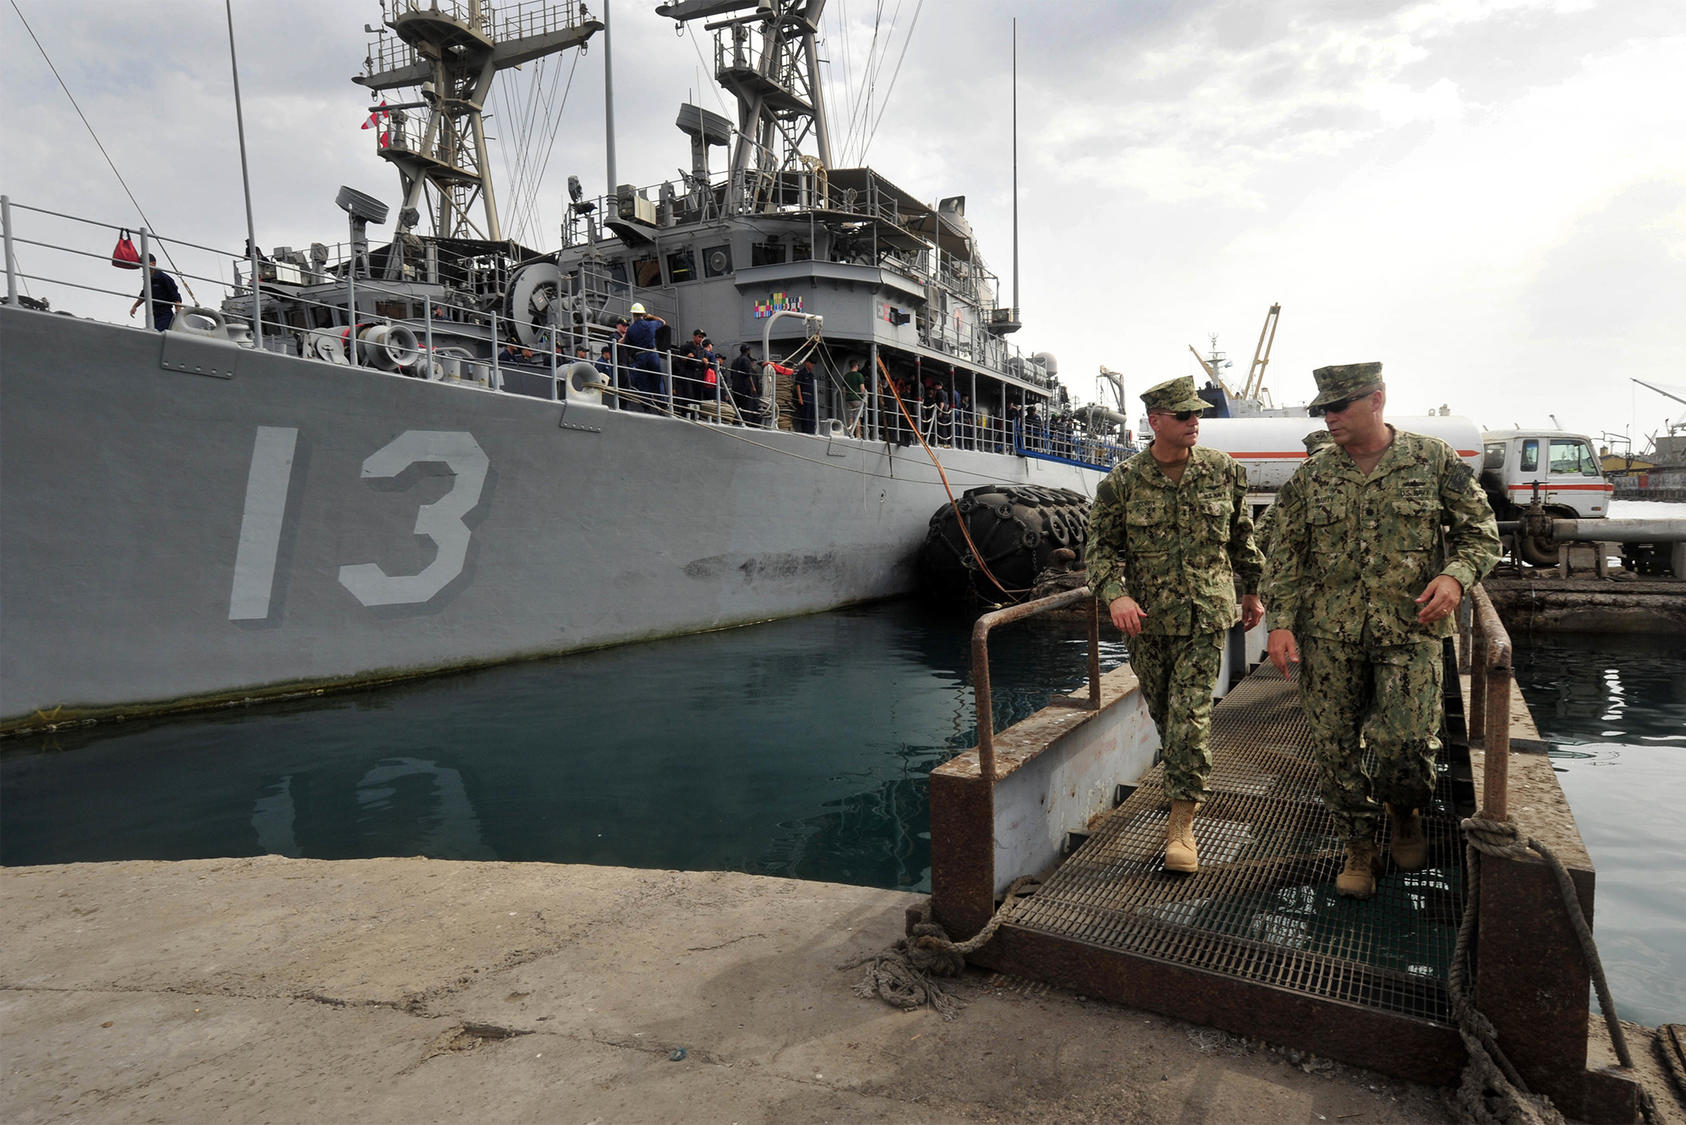 Rear Adm. John Scorby, then commander of Navy Region Europe, Africa, Southwest Asia, left, speaks with Cmdr. Jeffrey Marty, right, during a brief of port operations in the port of Djibouti on May 19, 2015. (Photo: U.S. Navy)